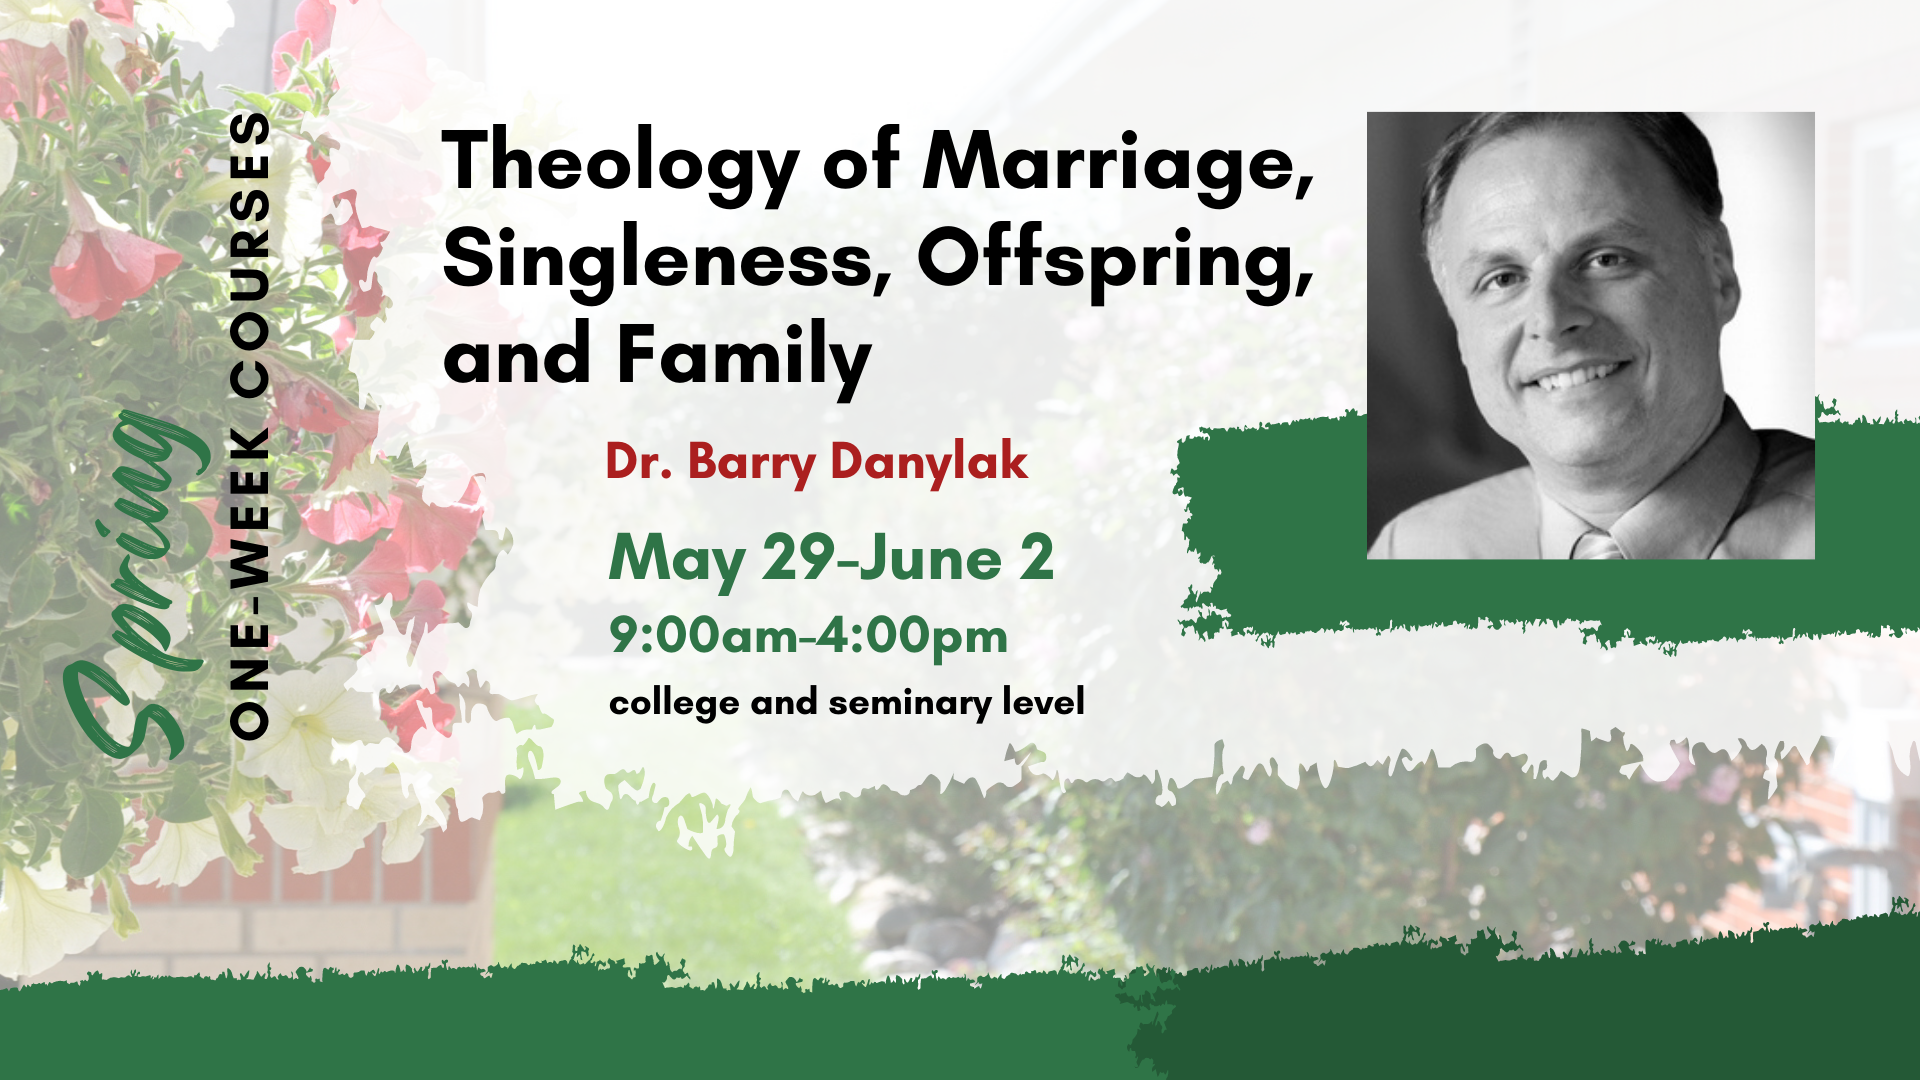 Theology of Marriage, Singleness, Offspring, and Family. One Week Course